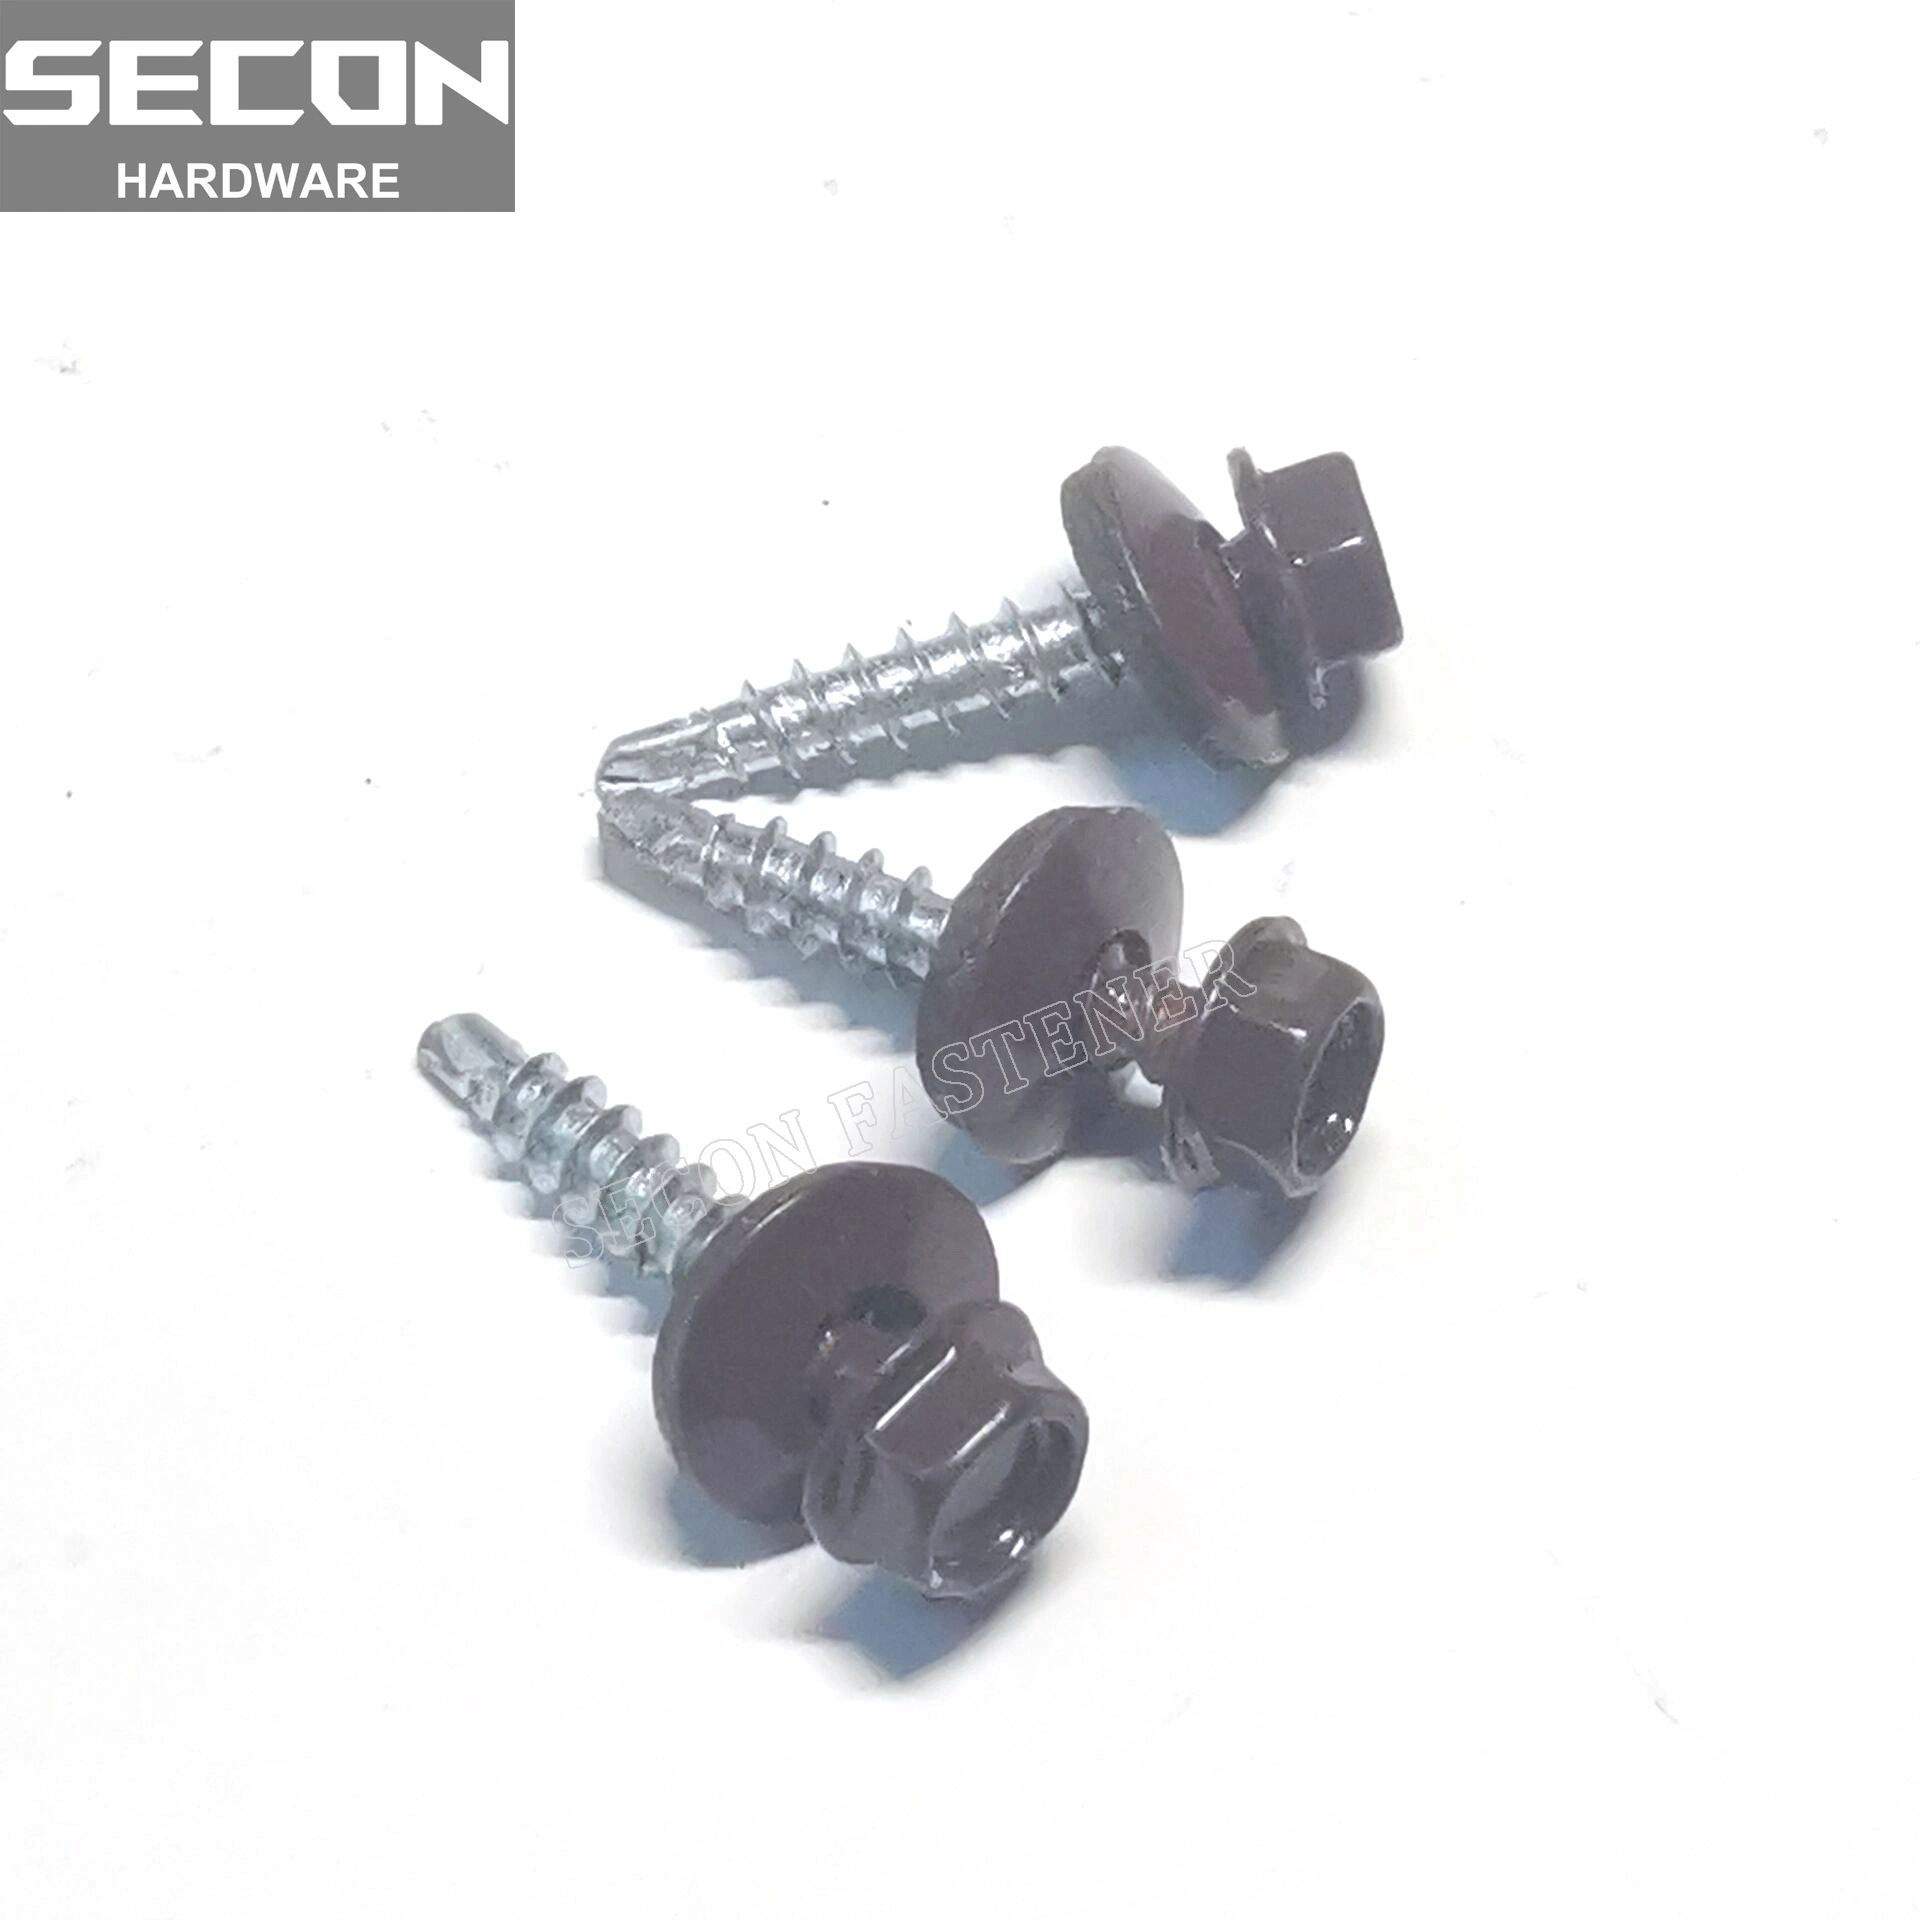 Made in China DIN 7504 Roofing Screw Uni 8117 DIN7504K Roofing Screw with Washer Pained Carbon Steel Bi-Metal Screw Self Drilling Screw